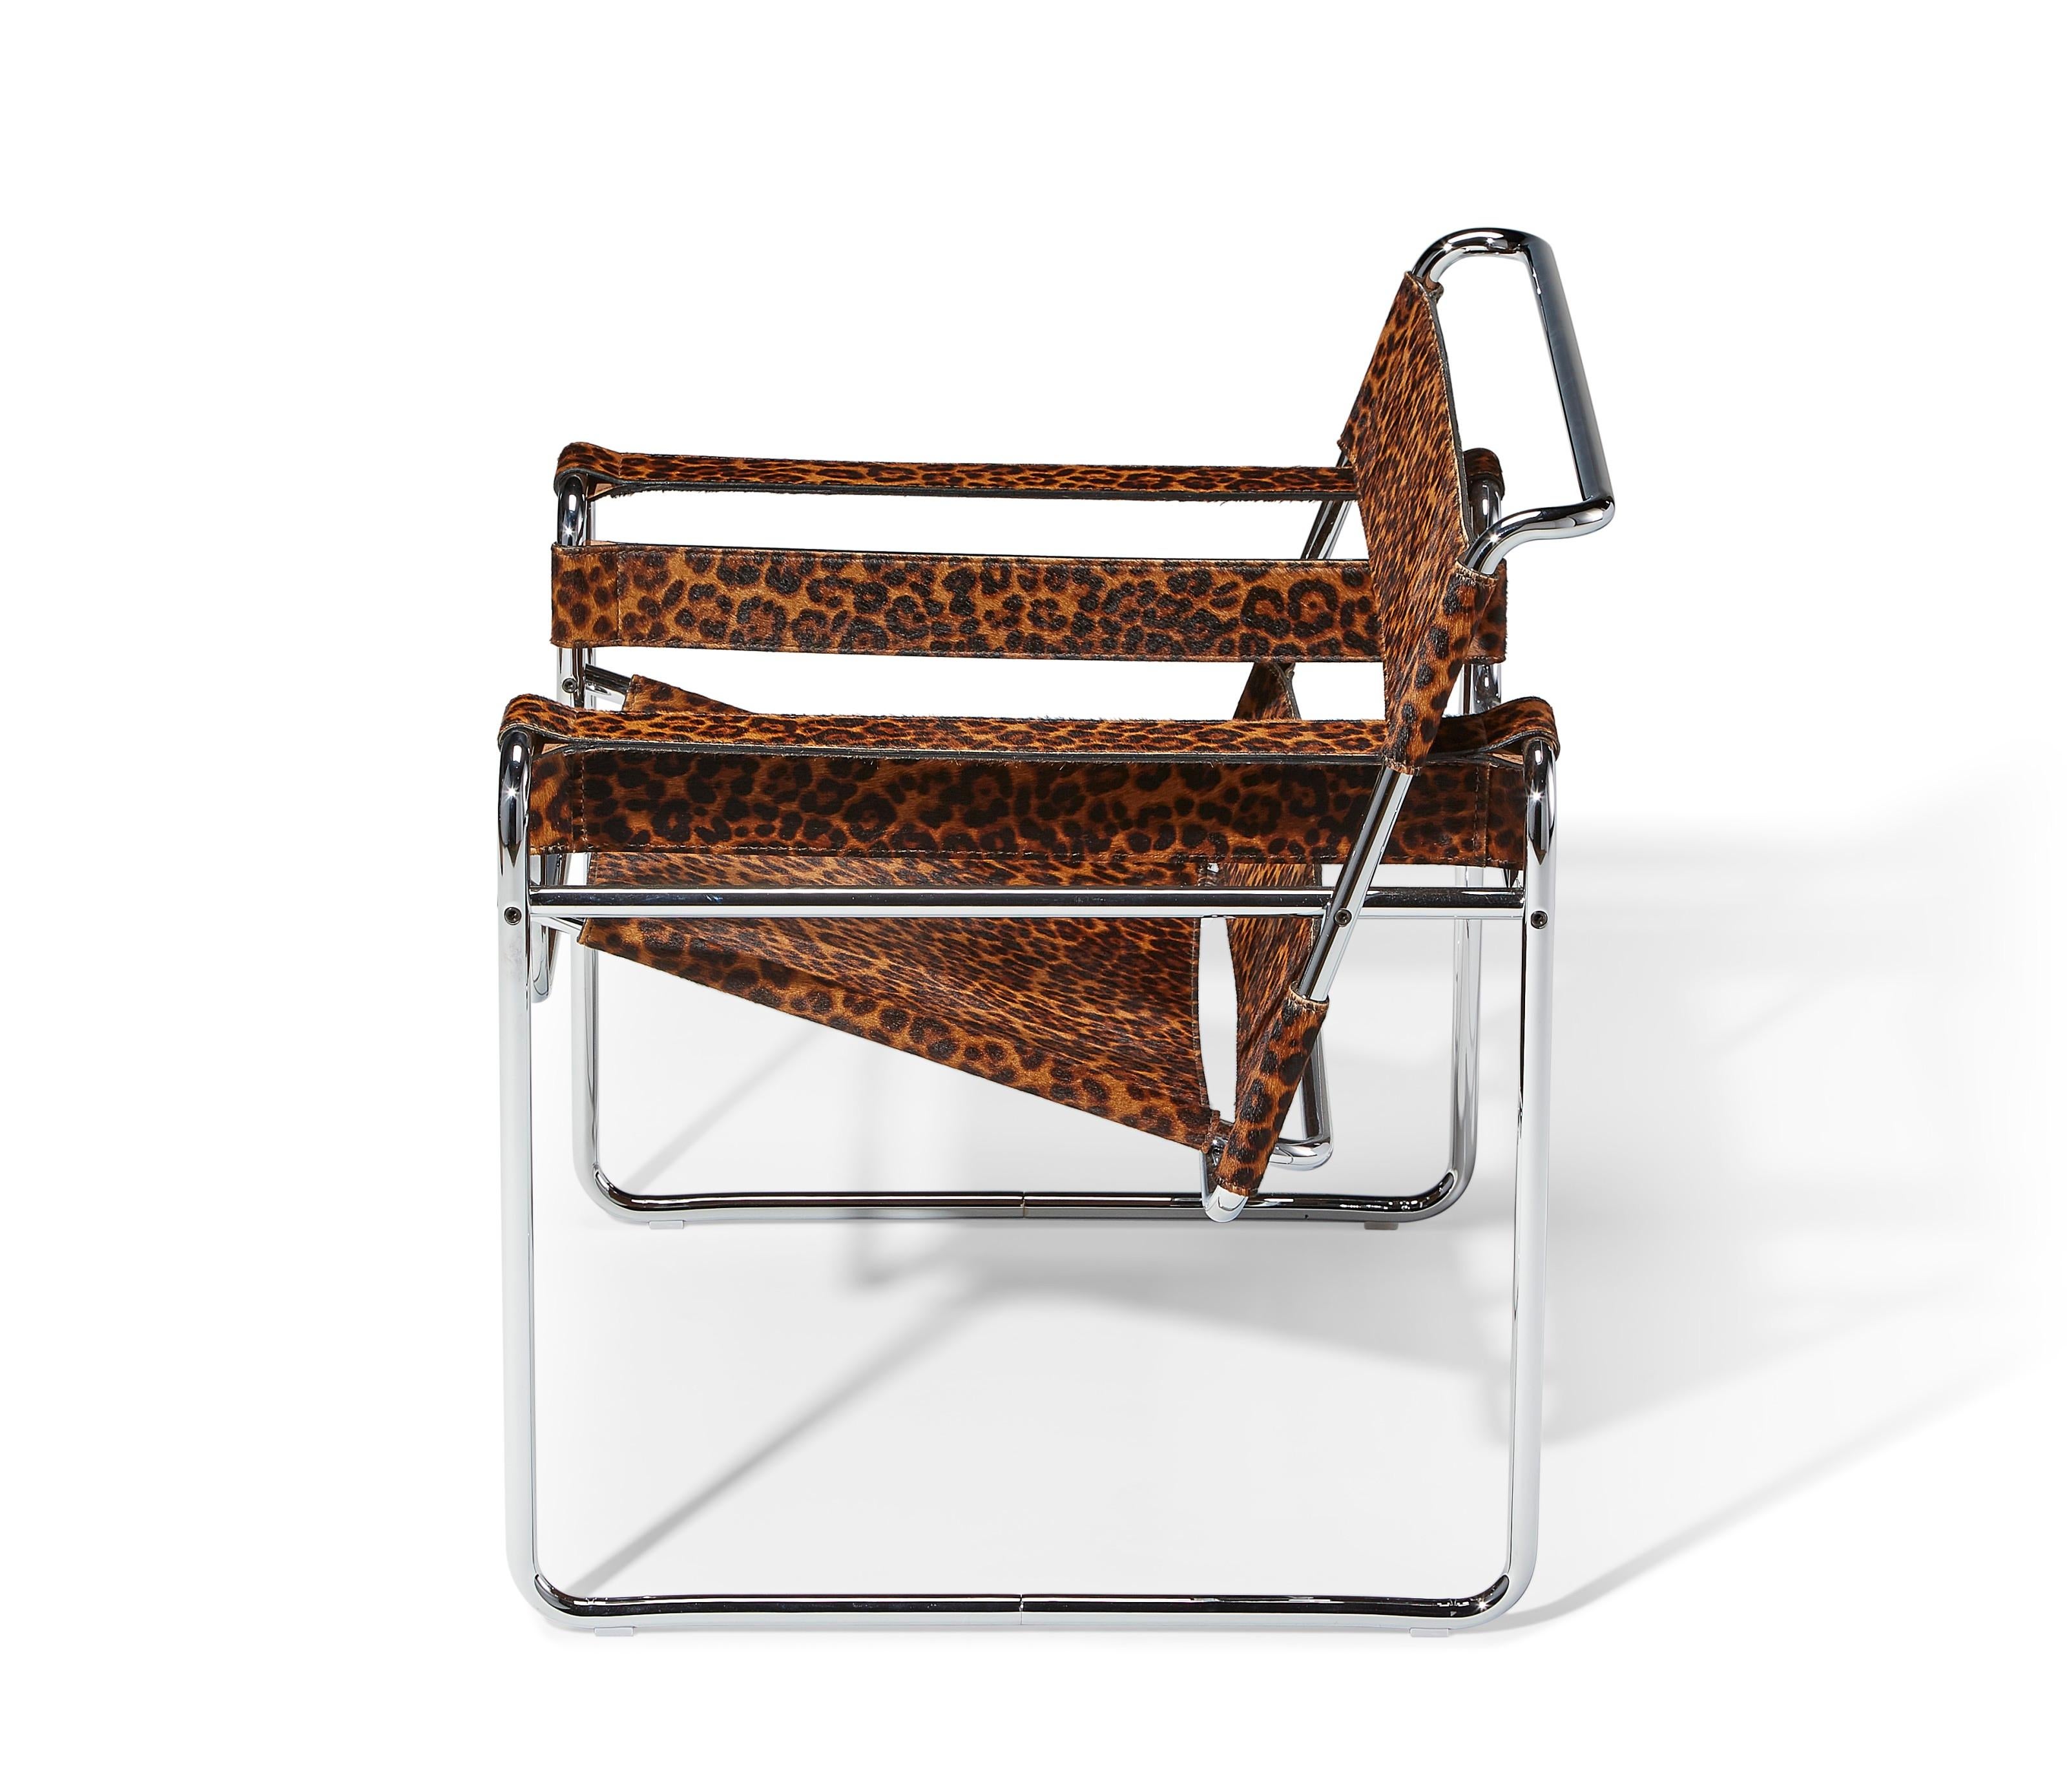 Knoll x Supreme Leopard Modell B3 Wassily Loungesessel, Marcel Breuer, 1925, 2019 im Zustand „Gut“ in Brooklyn, NY